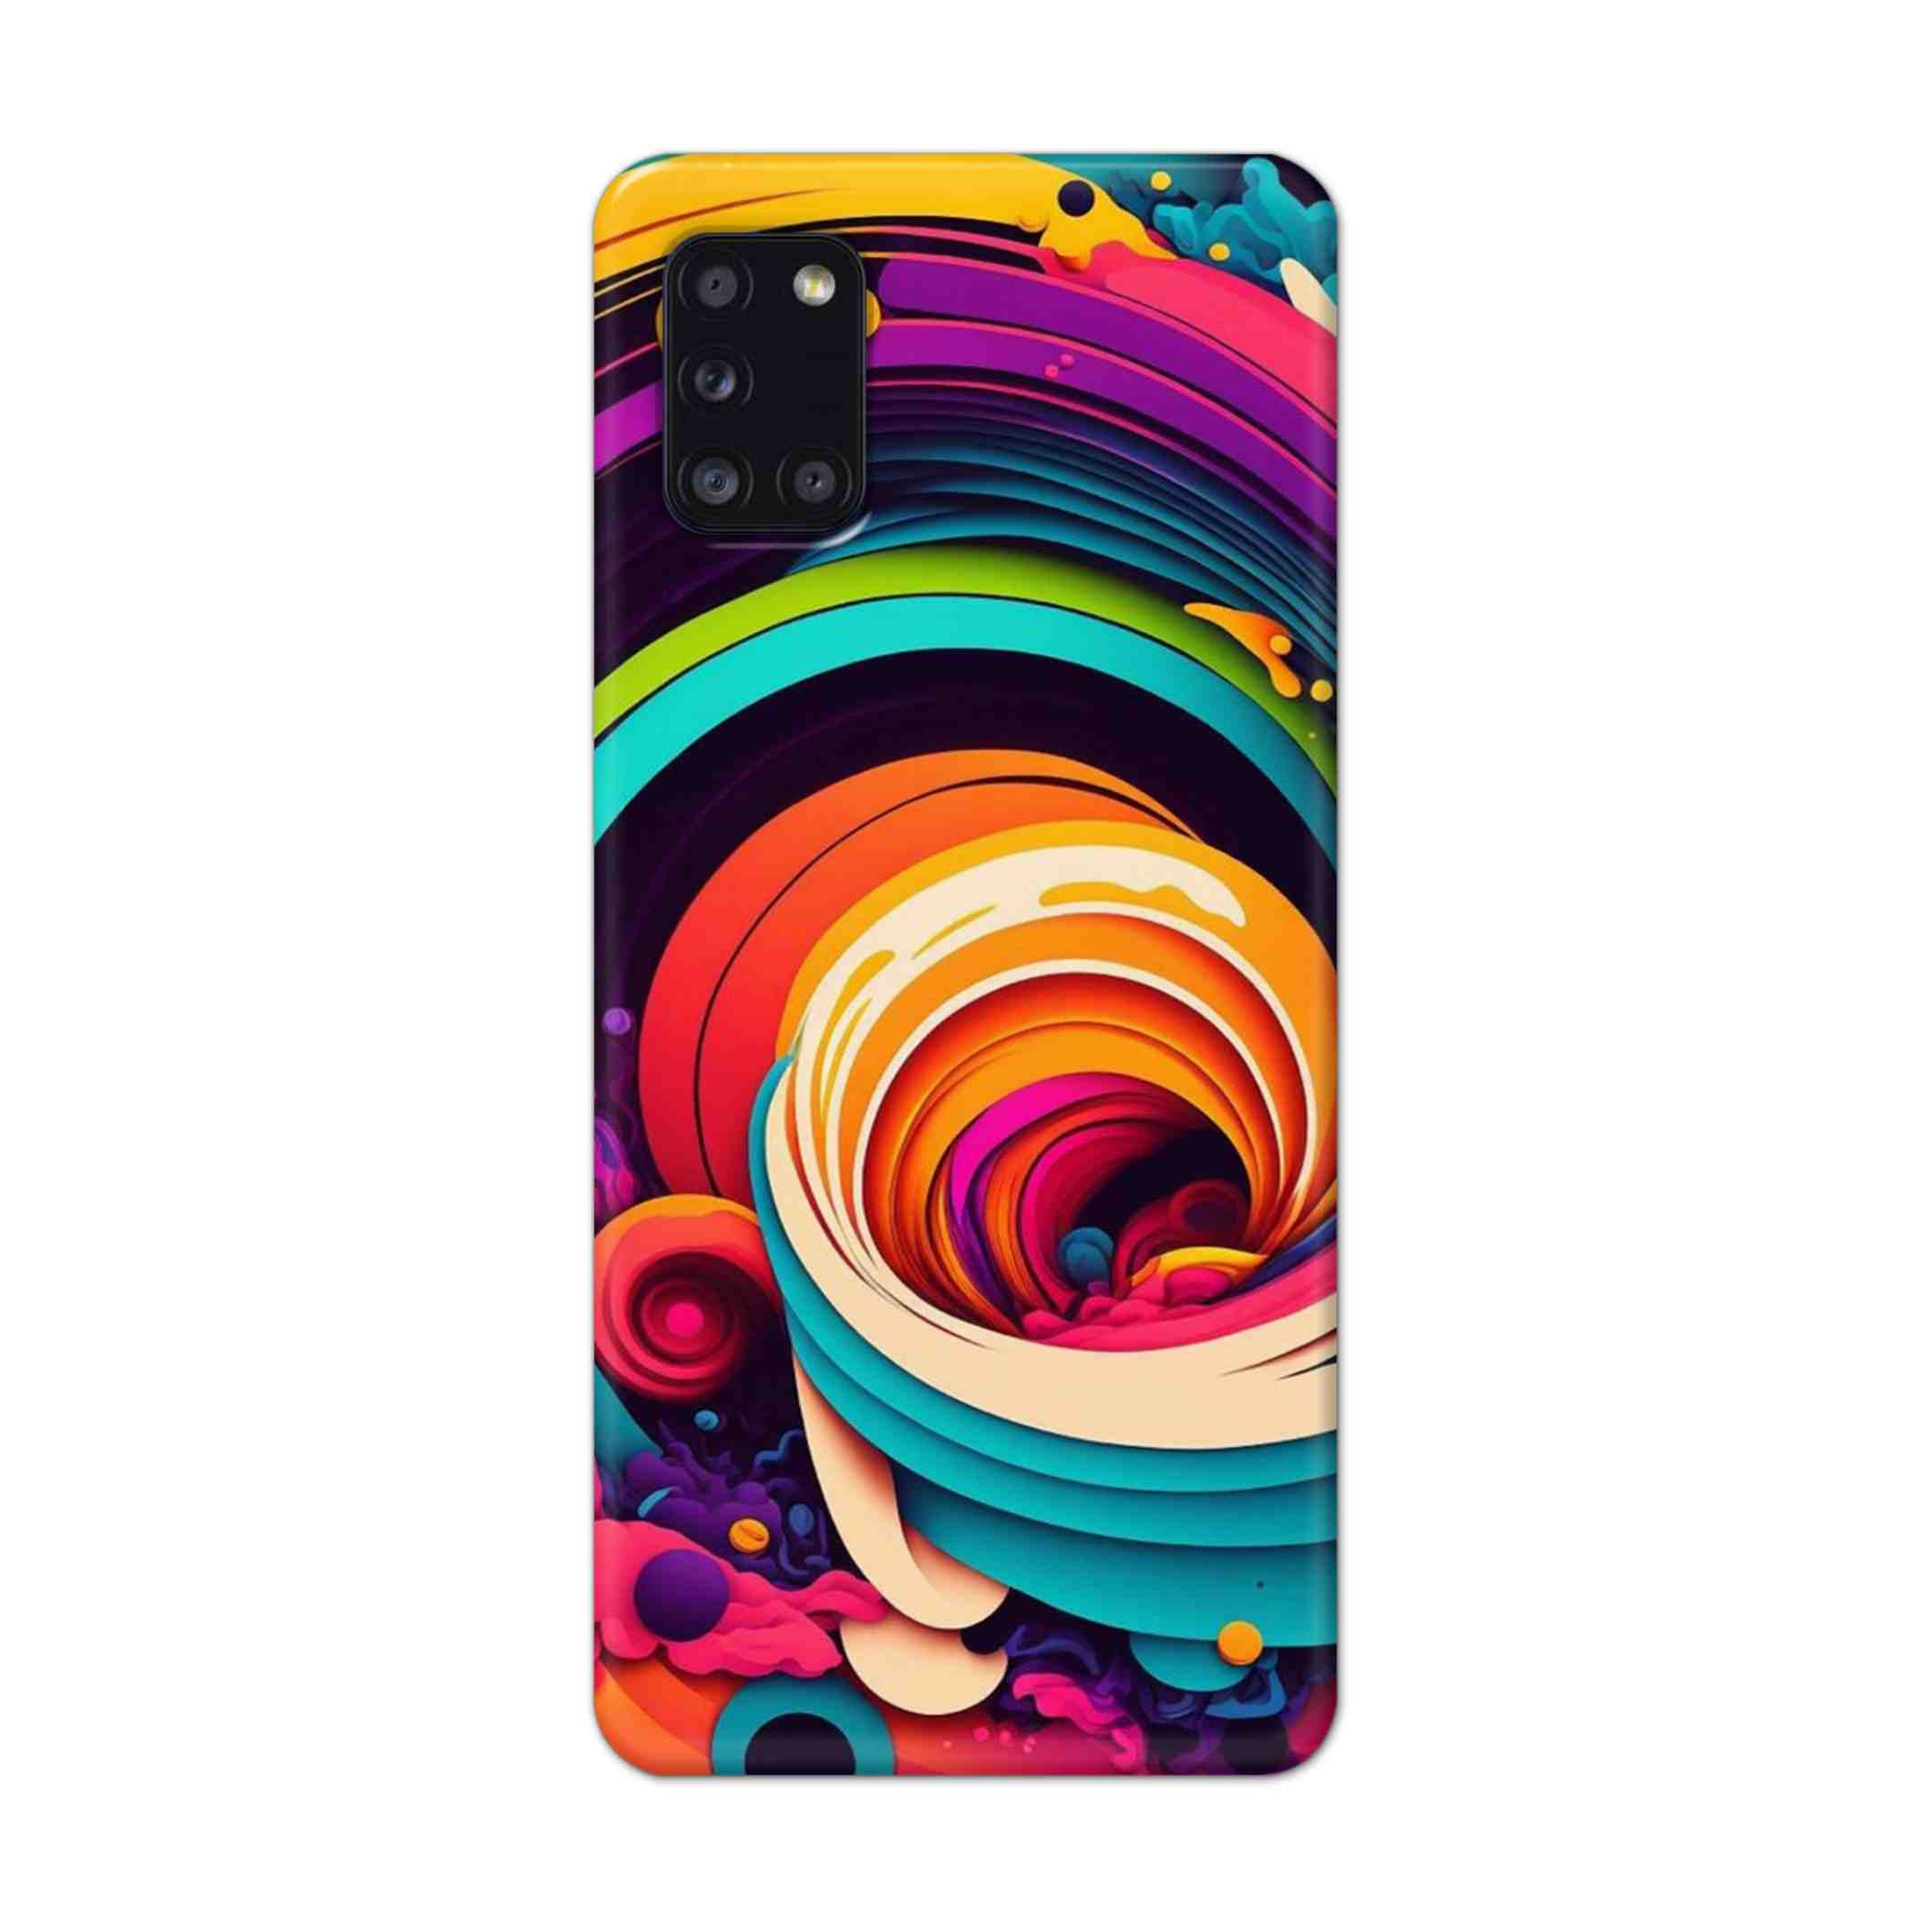 Buy Colour Circle Hard Back Mobile Phone Case Cover For Samsung Galaxy A31 Online